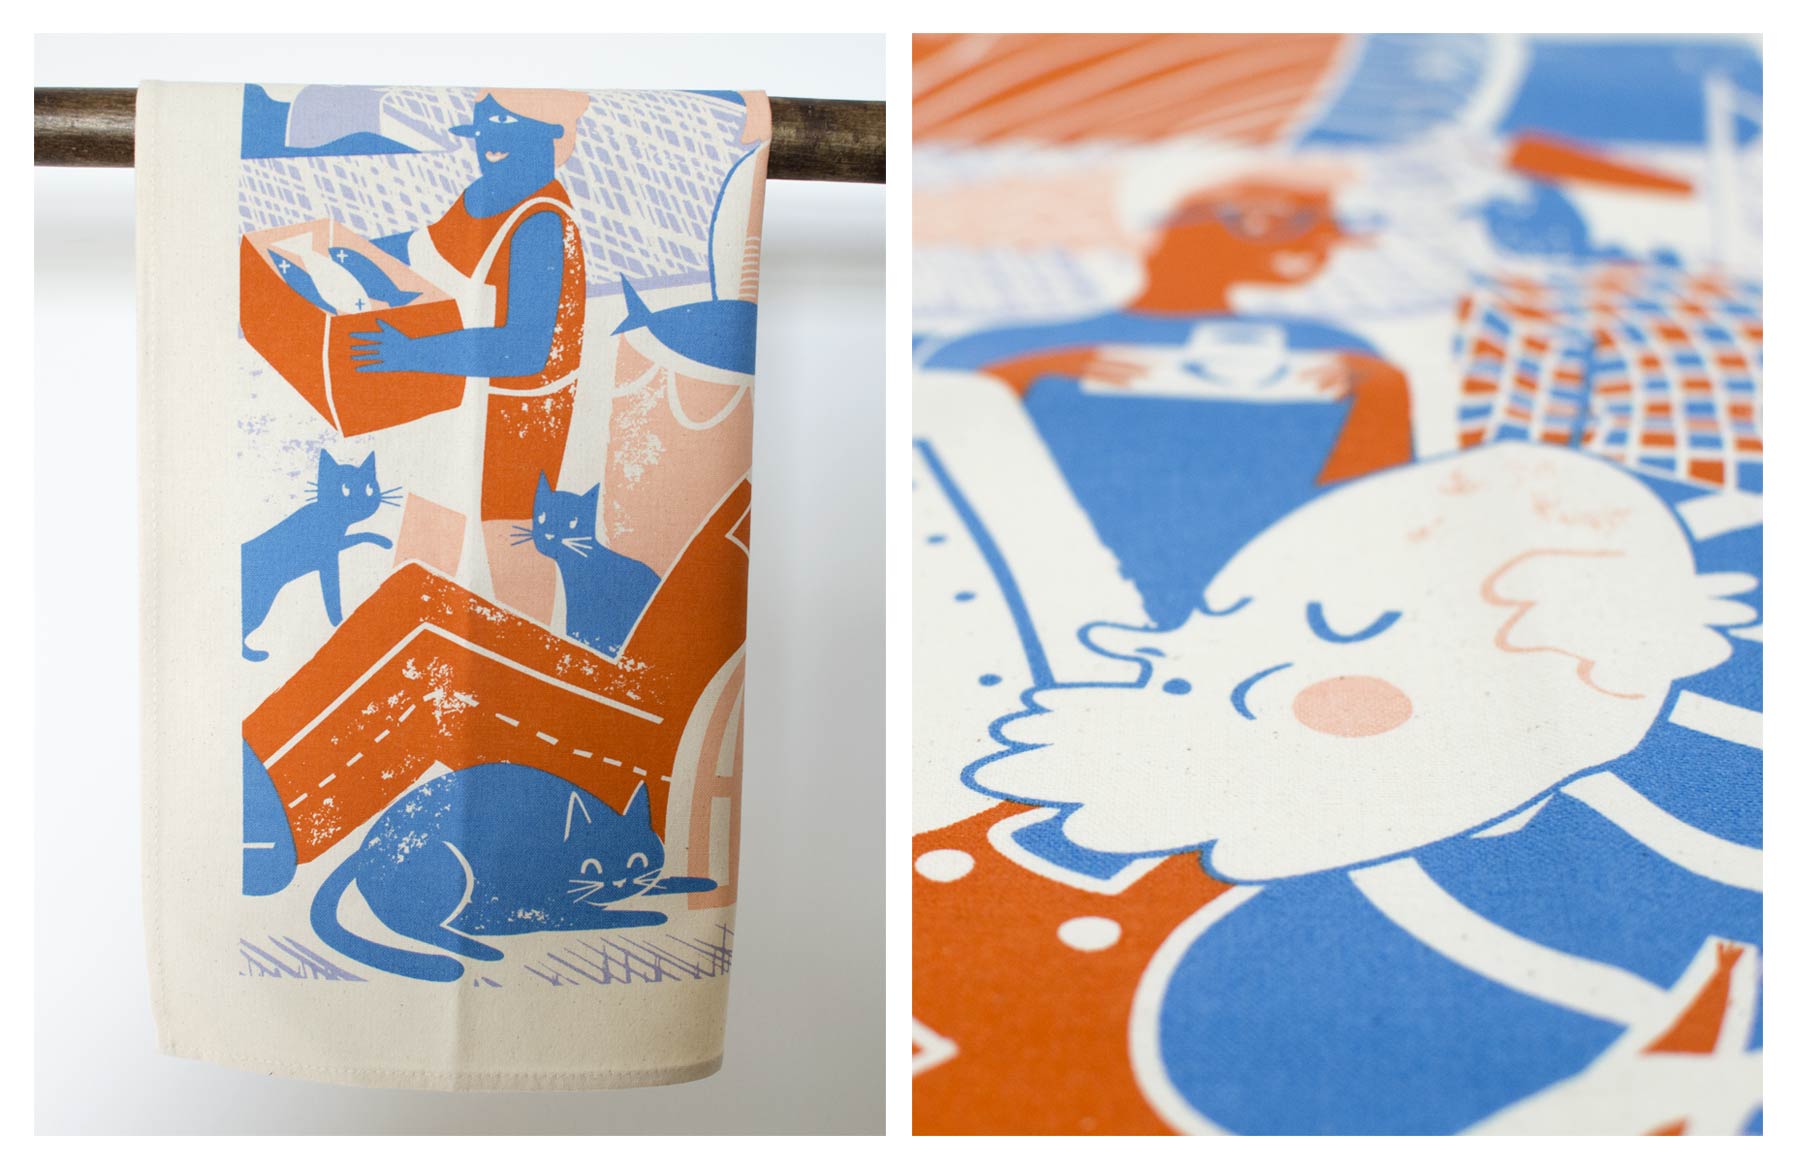 Quayside Teatowel Illustrations, by Elly Jahnz for Seasalt Cornwall